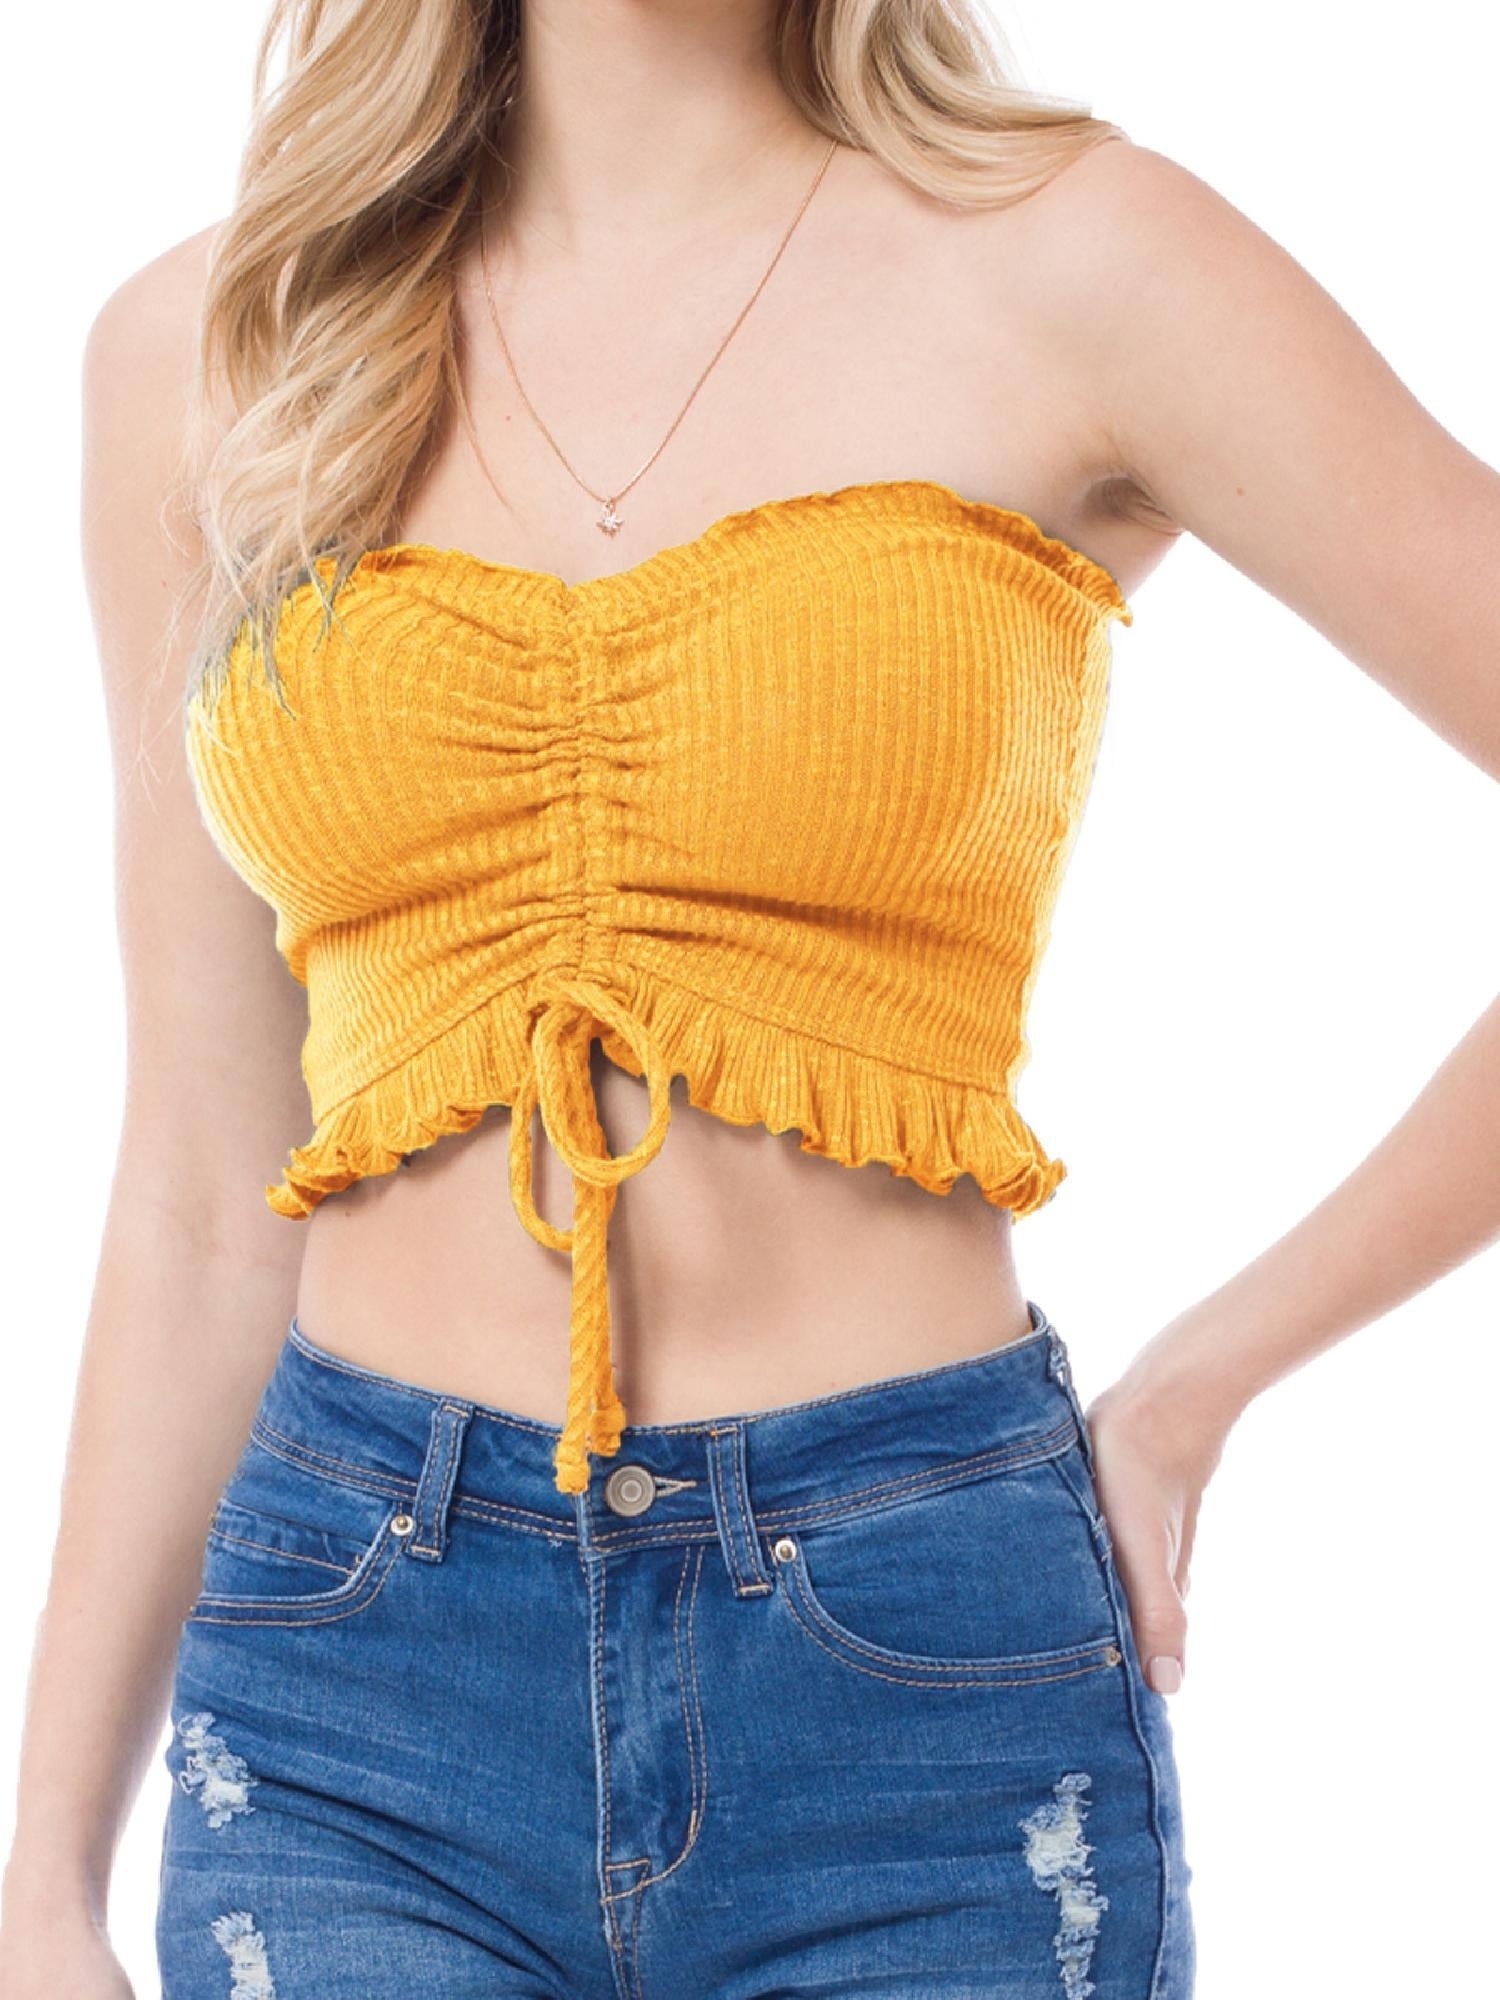 model wearing a yellow cropped top and blue denim jeans